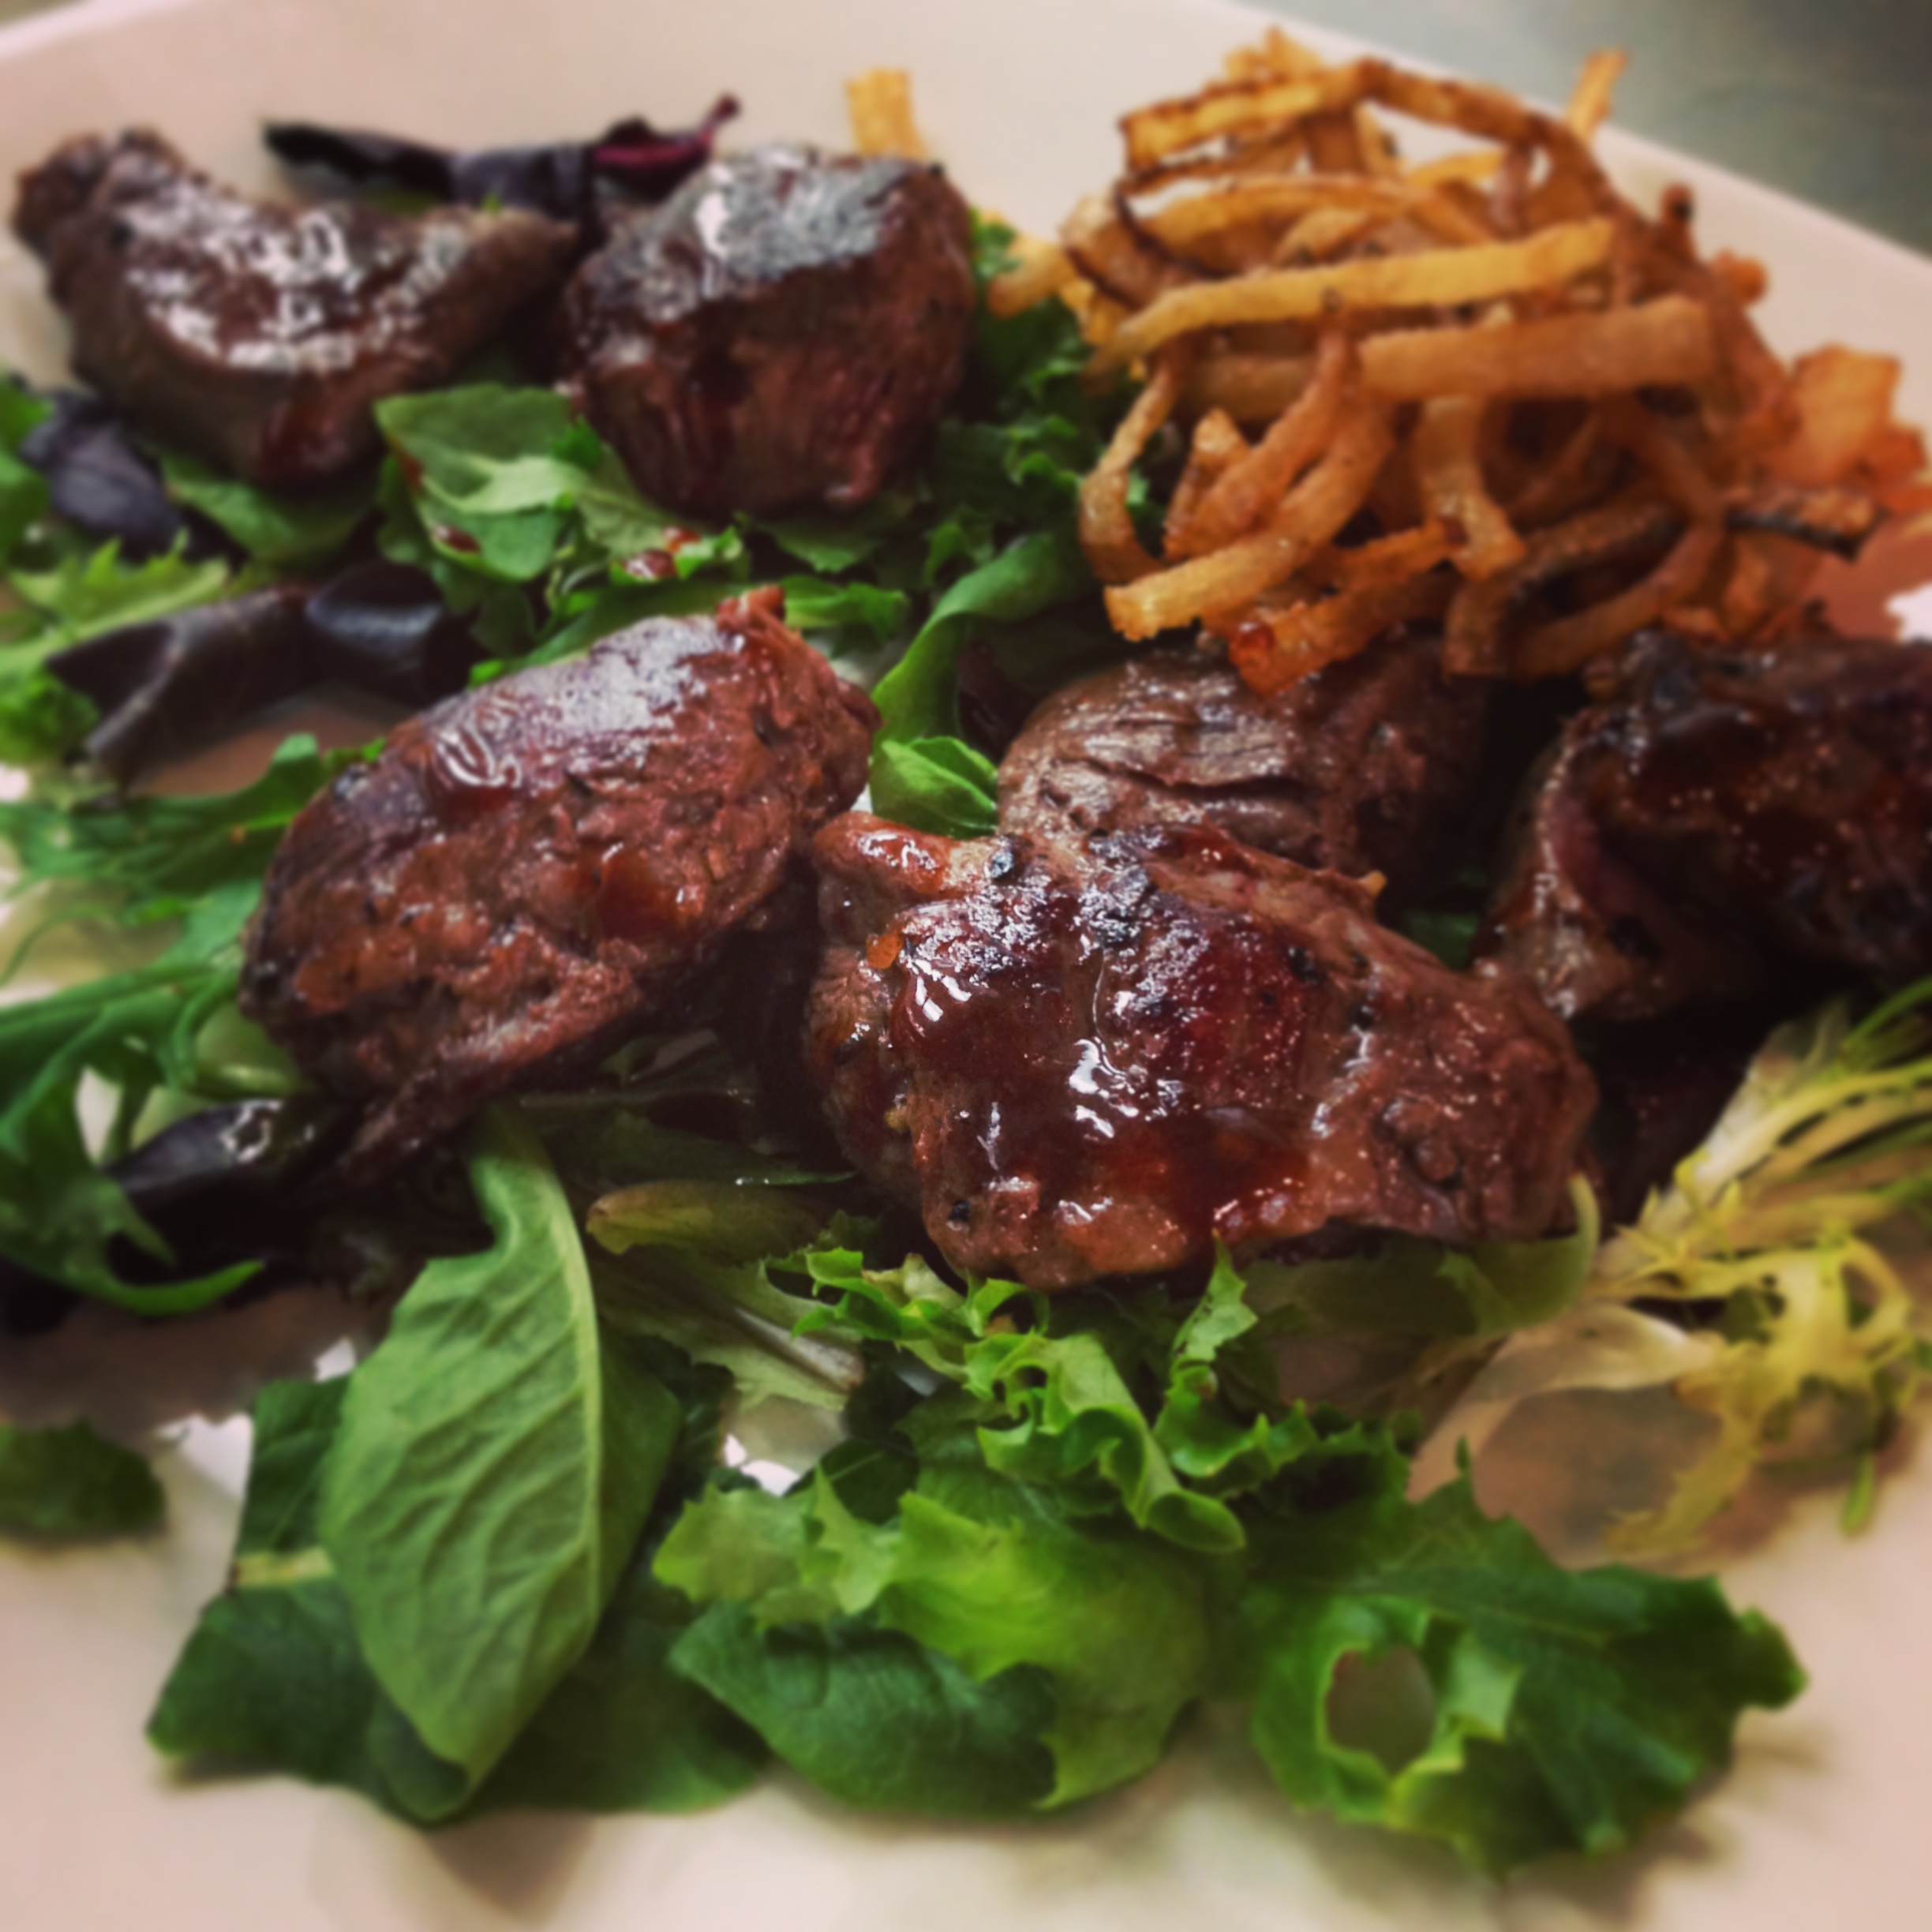 A Signature Item at The Barlow Room: Steak Bites with Fried Onions.